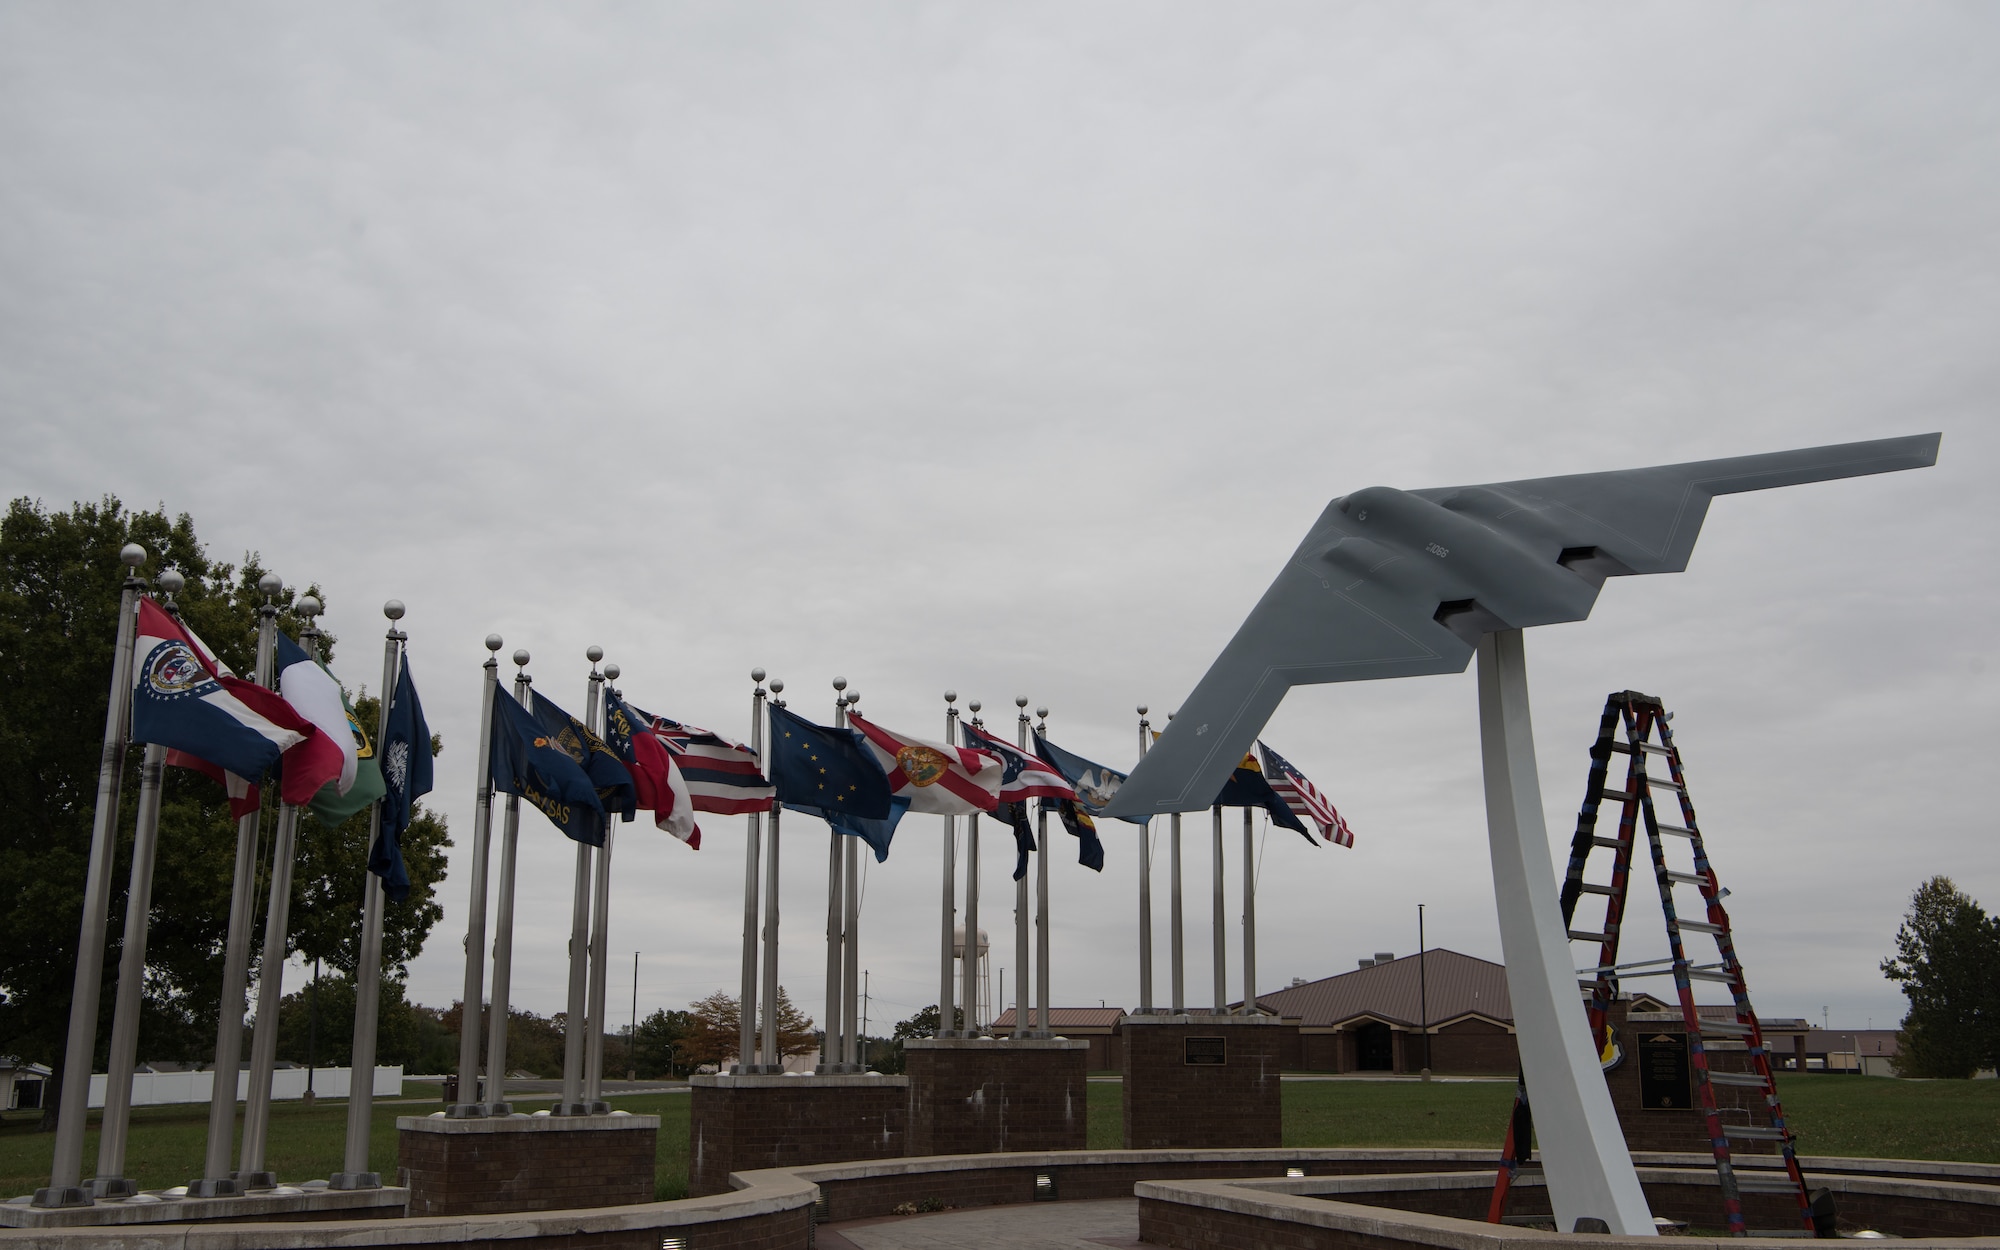 The B-2 Spirit static display sits on its pedestal in front of a set of state flags.